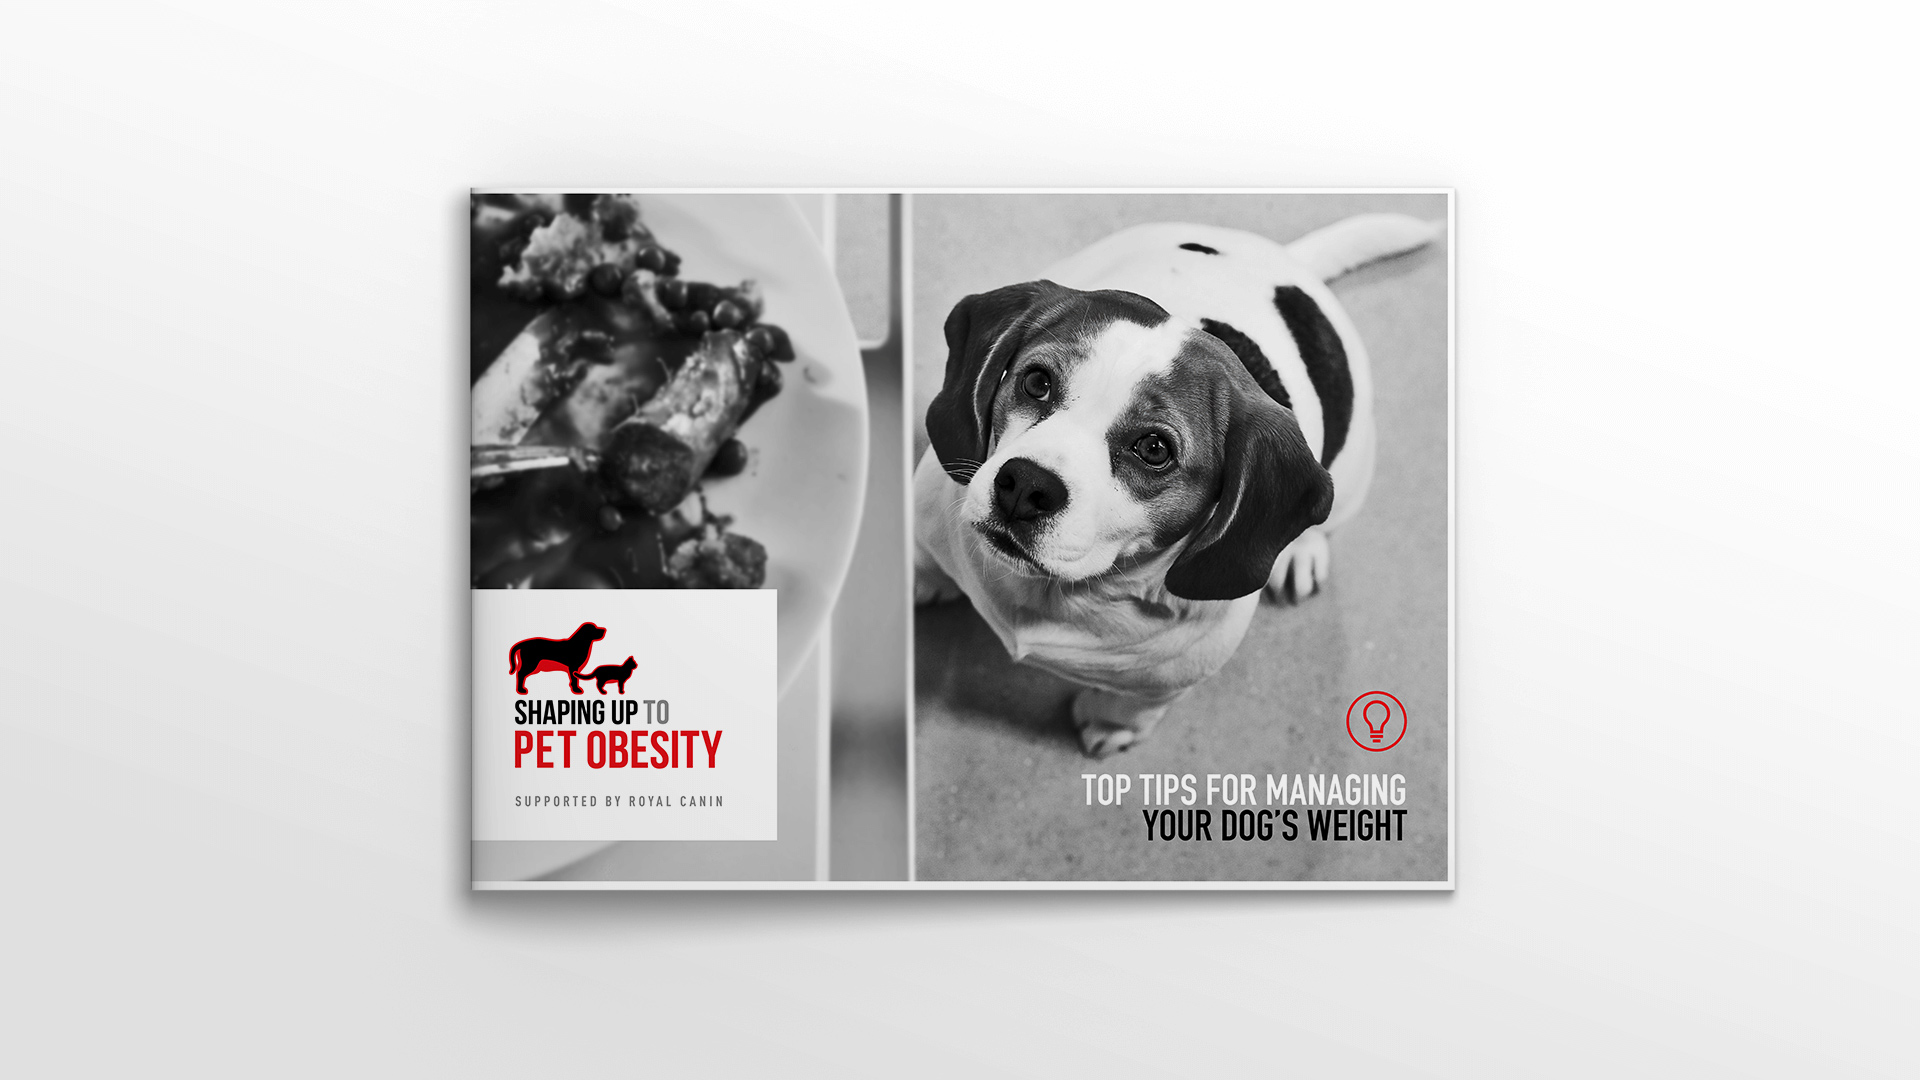 Royal Canin Shaping up to Pet Obesity booklet